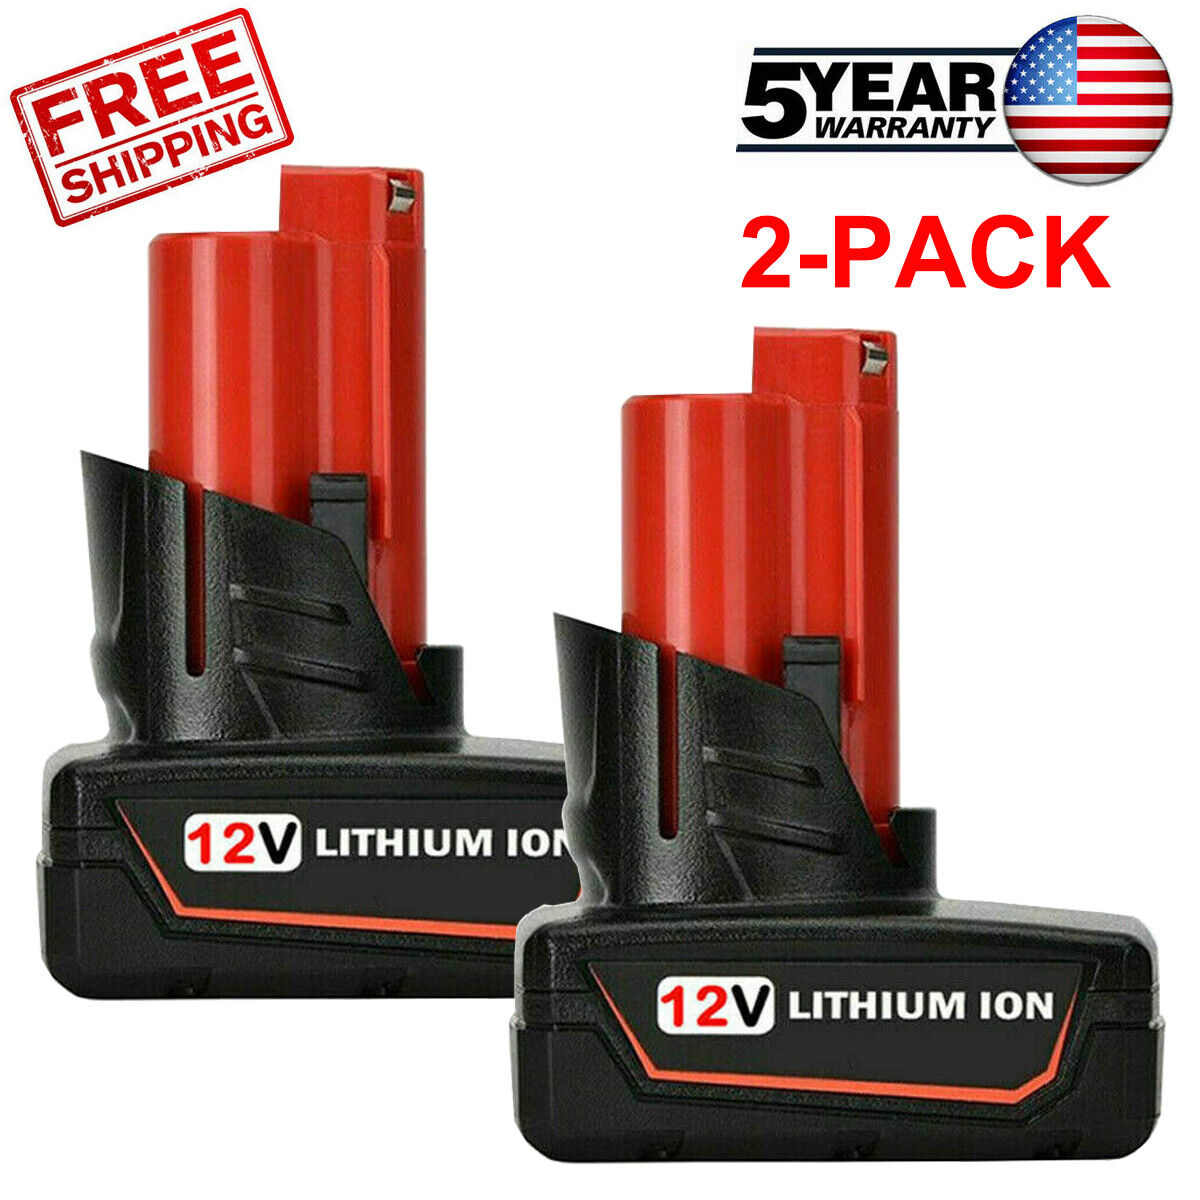 2X For Milwaukee M12 48-11-2460 Lithium 5.0 AH Extended Capacity Battery USA Powerextra 48-11-2450